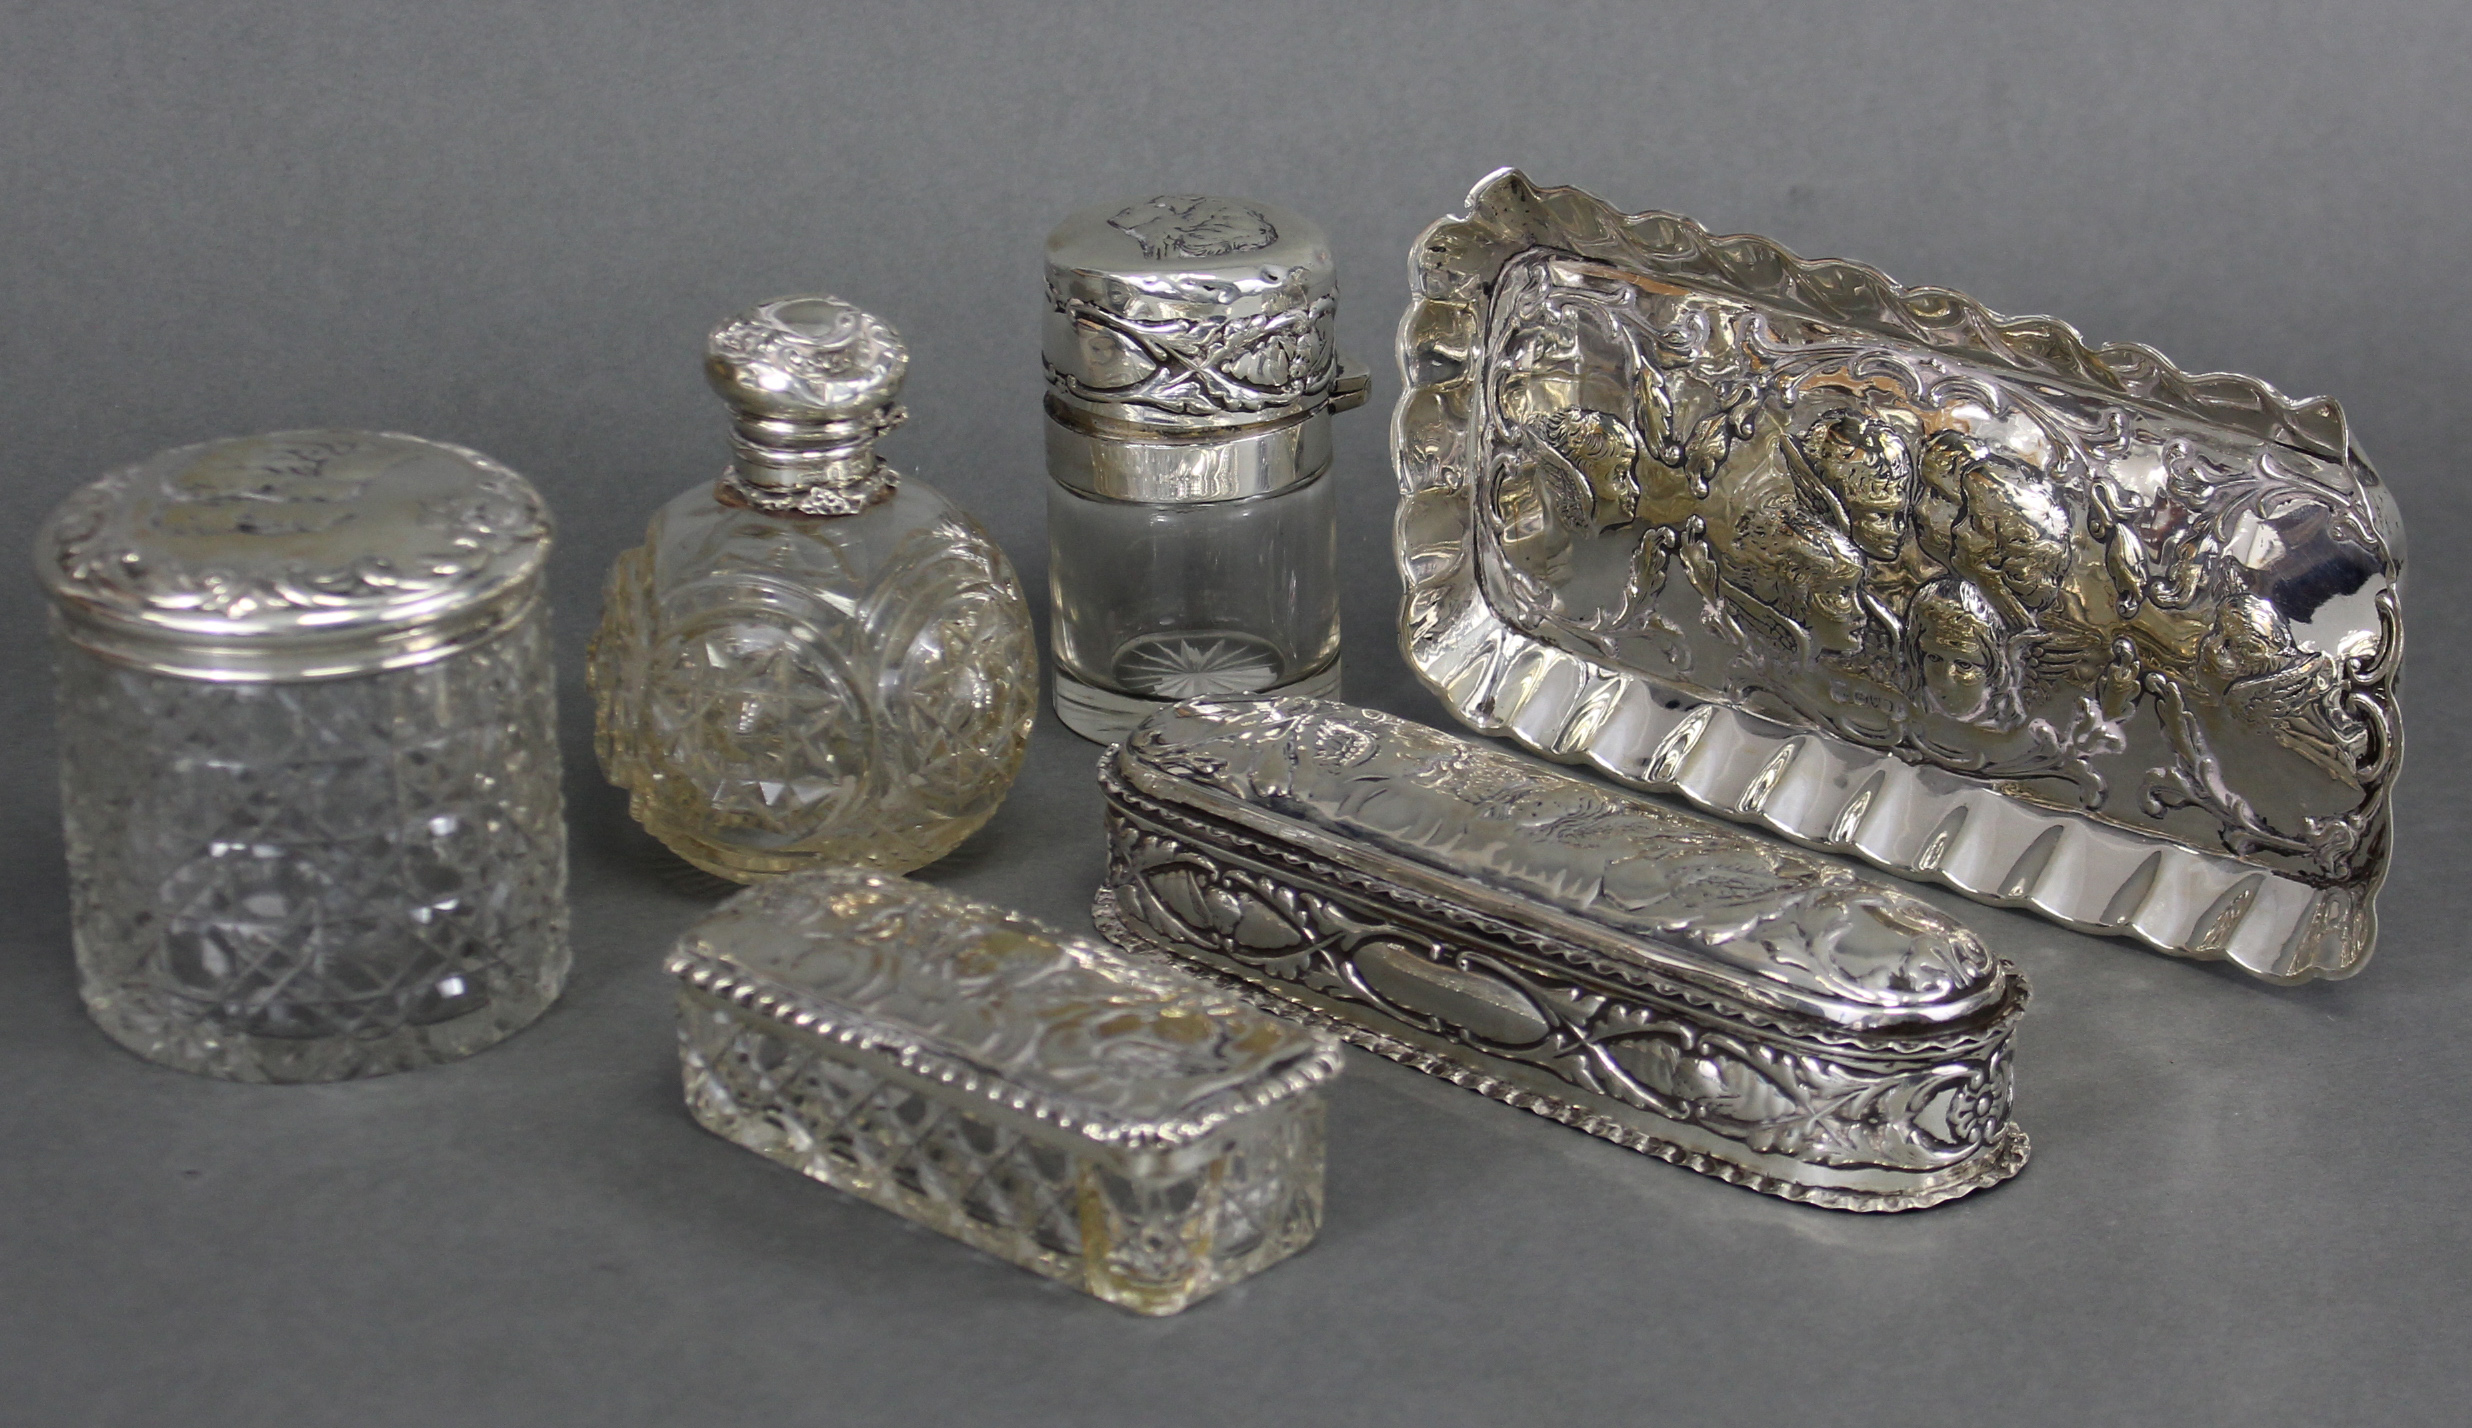 An Edwardian silver toilet set embossed with cherub masks, comprising: a rectangular pin tray, 7¾” x